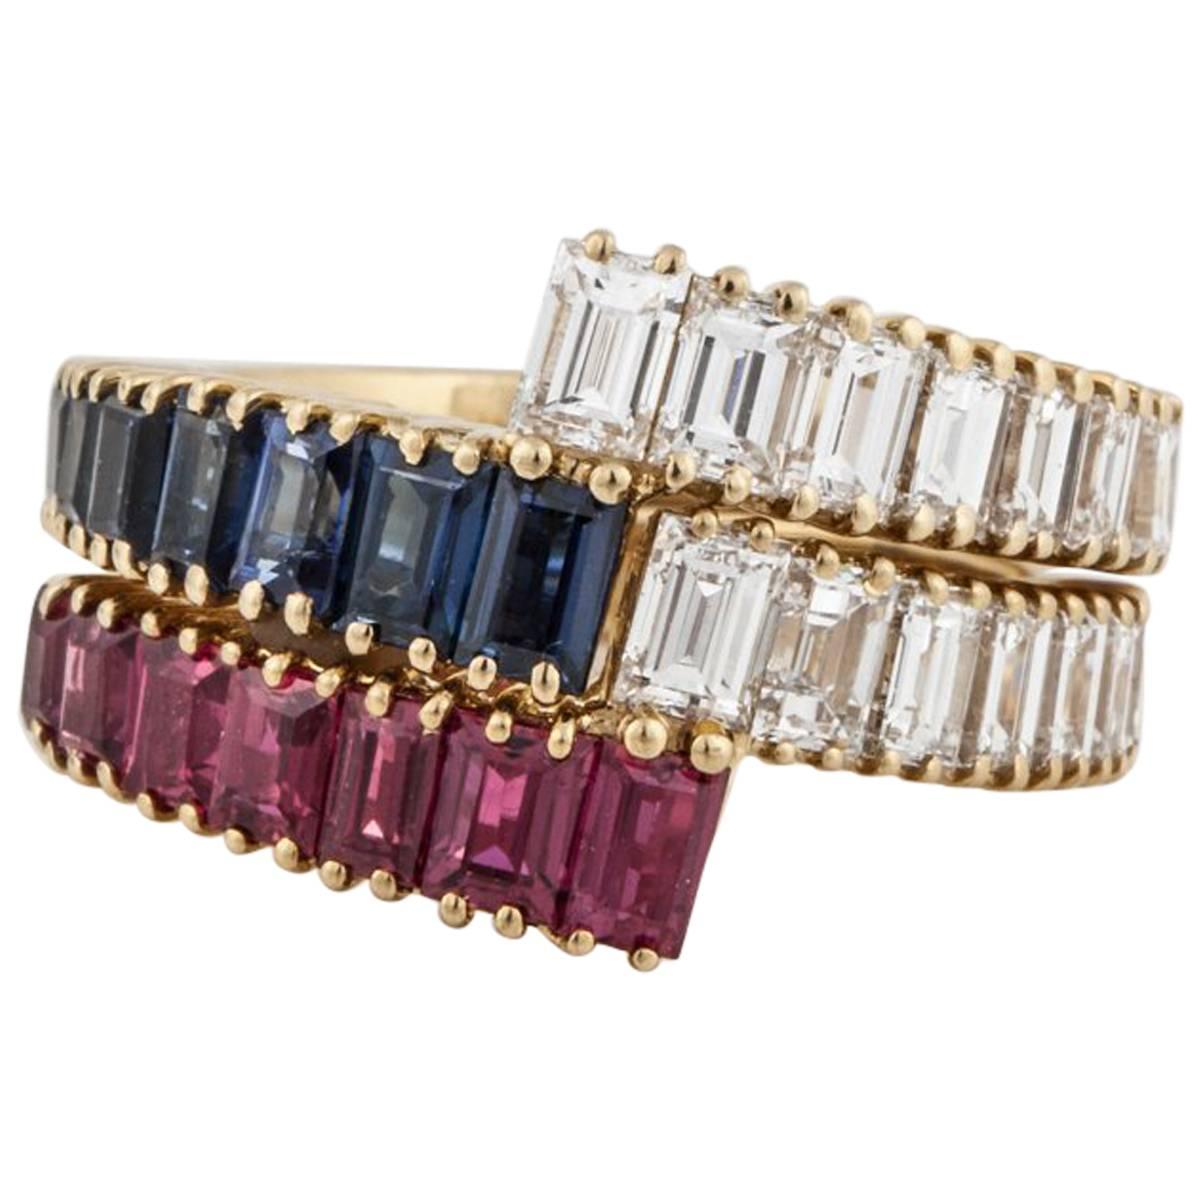 Diamond/Ruby and Diamond/Sapphire Nesting Crossover Rings in 18K Gold